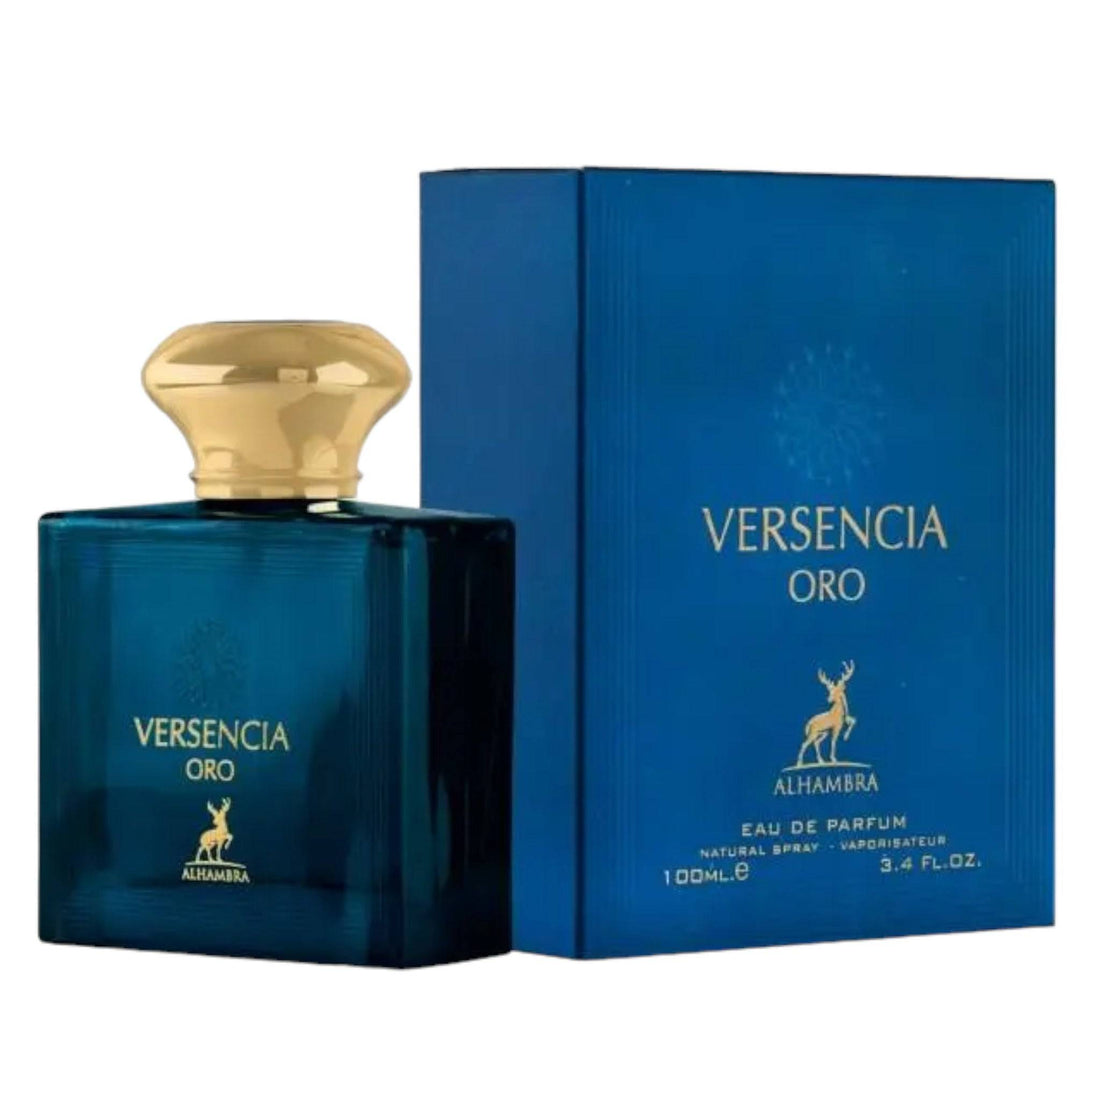 Sophisticated 100ml bottle of Versencia Oro Perfume by Maison Alhambra, reflecting its unique blend of mint, green apple, and woody notes.